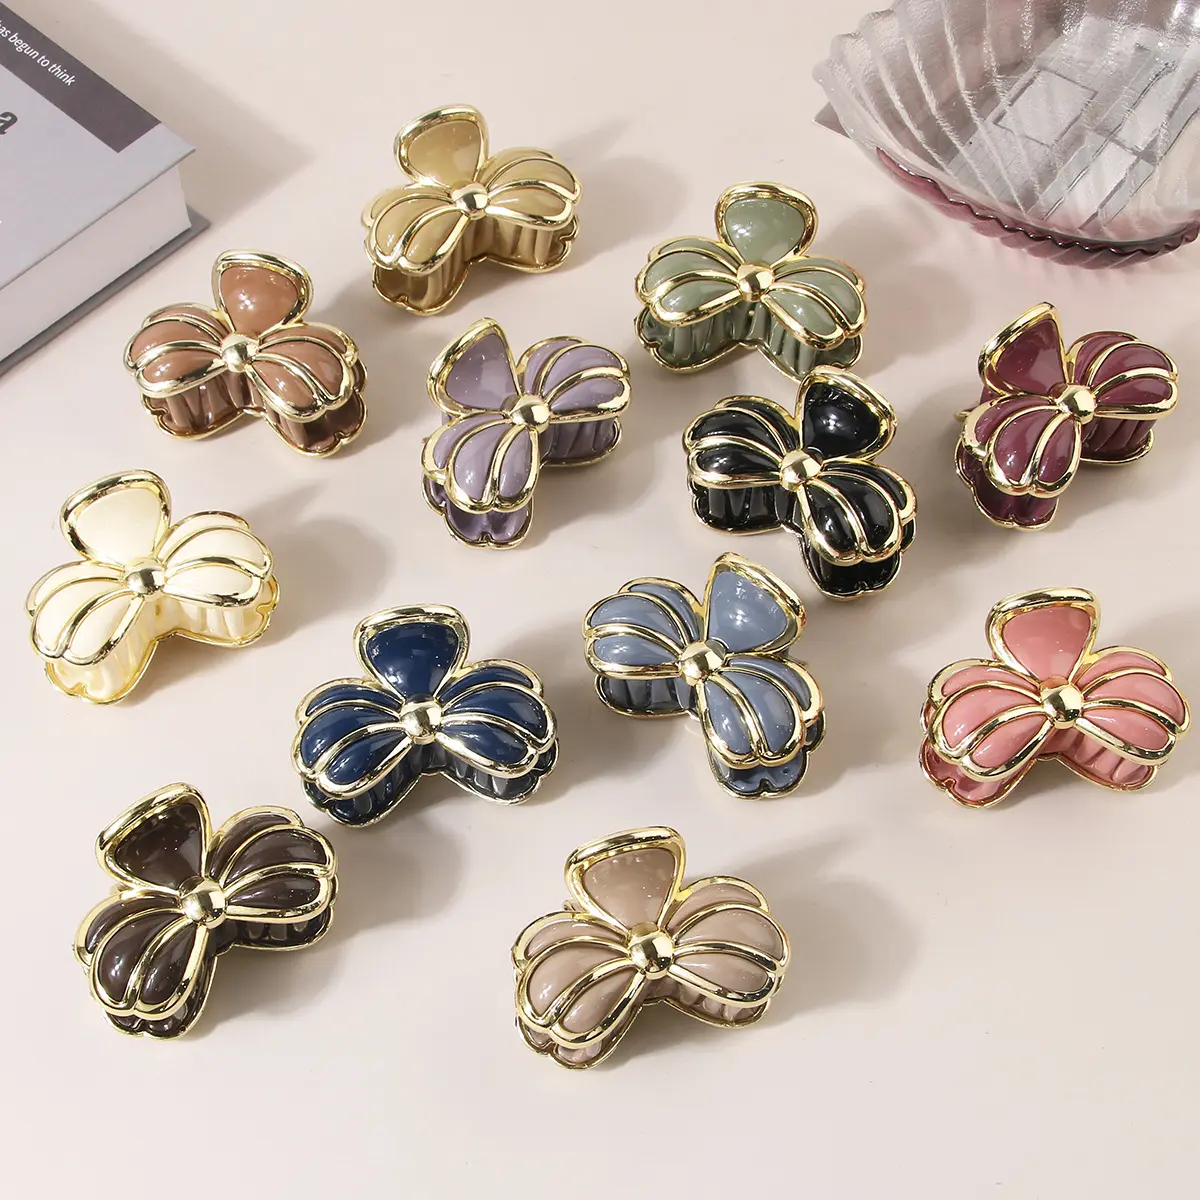 Medium Size Bowknot Hair Clips for Women Cute Colorful Plastic Hair Claws Metal Clips Bow Clips Wholesale